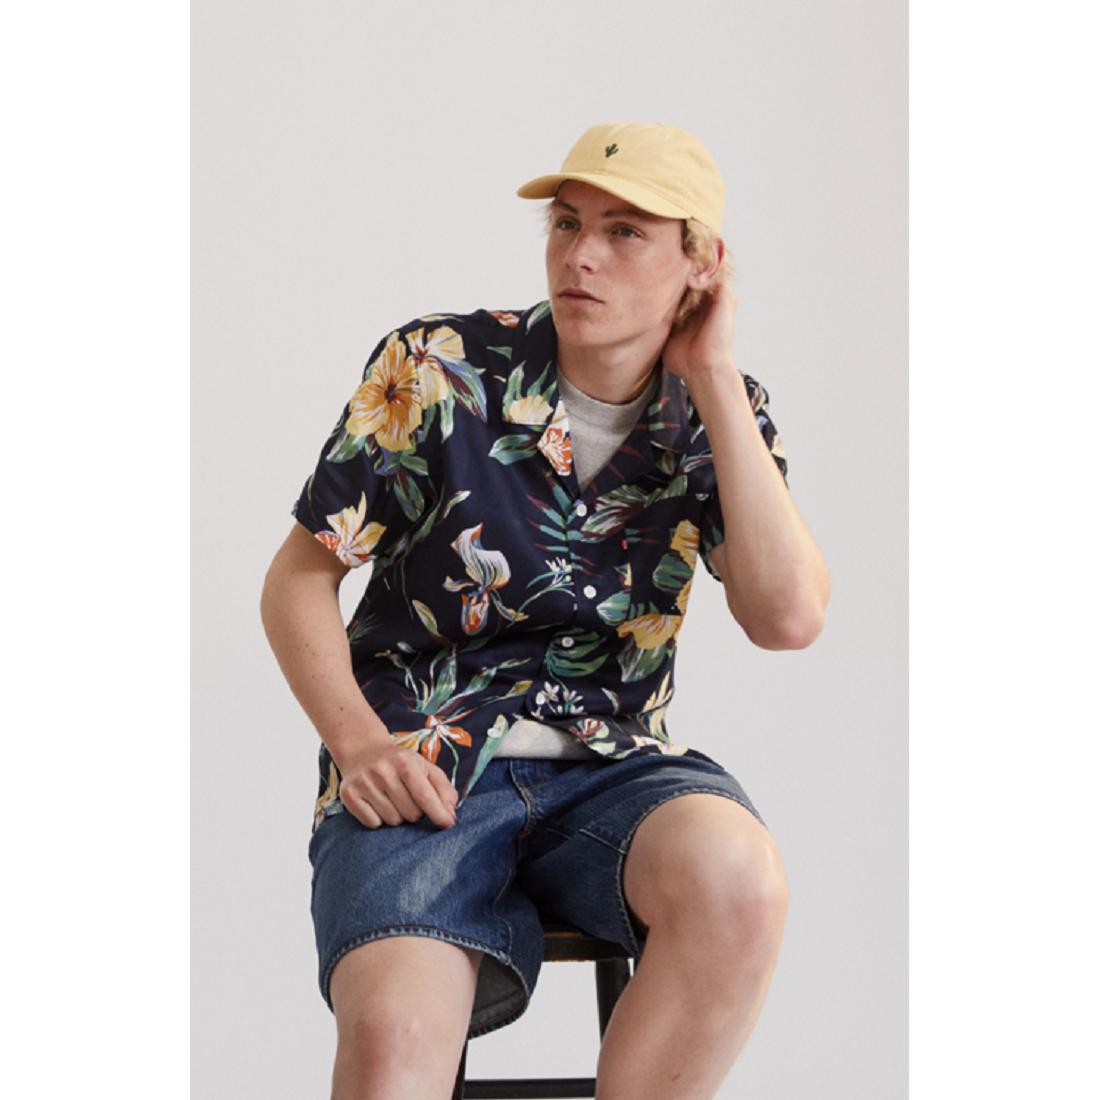 Levi's - Sunset Camp Shirt in Nepenthe Floral